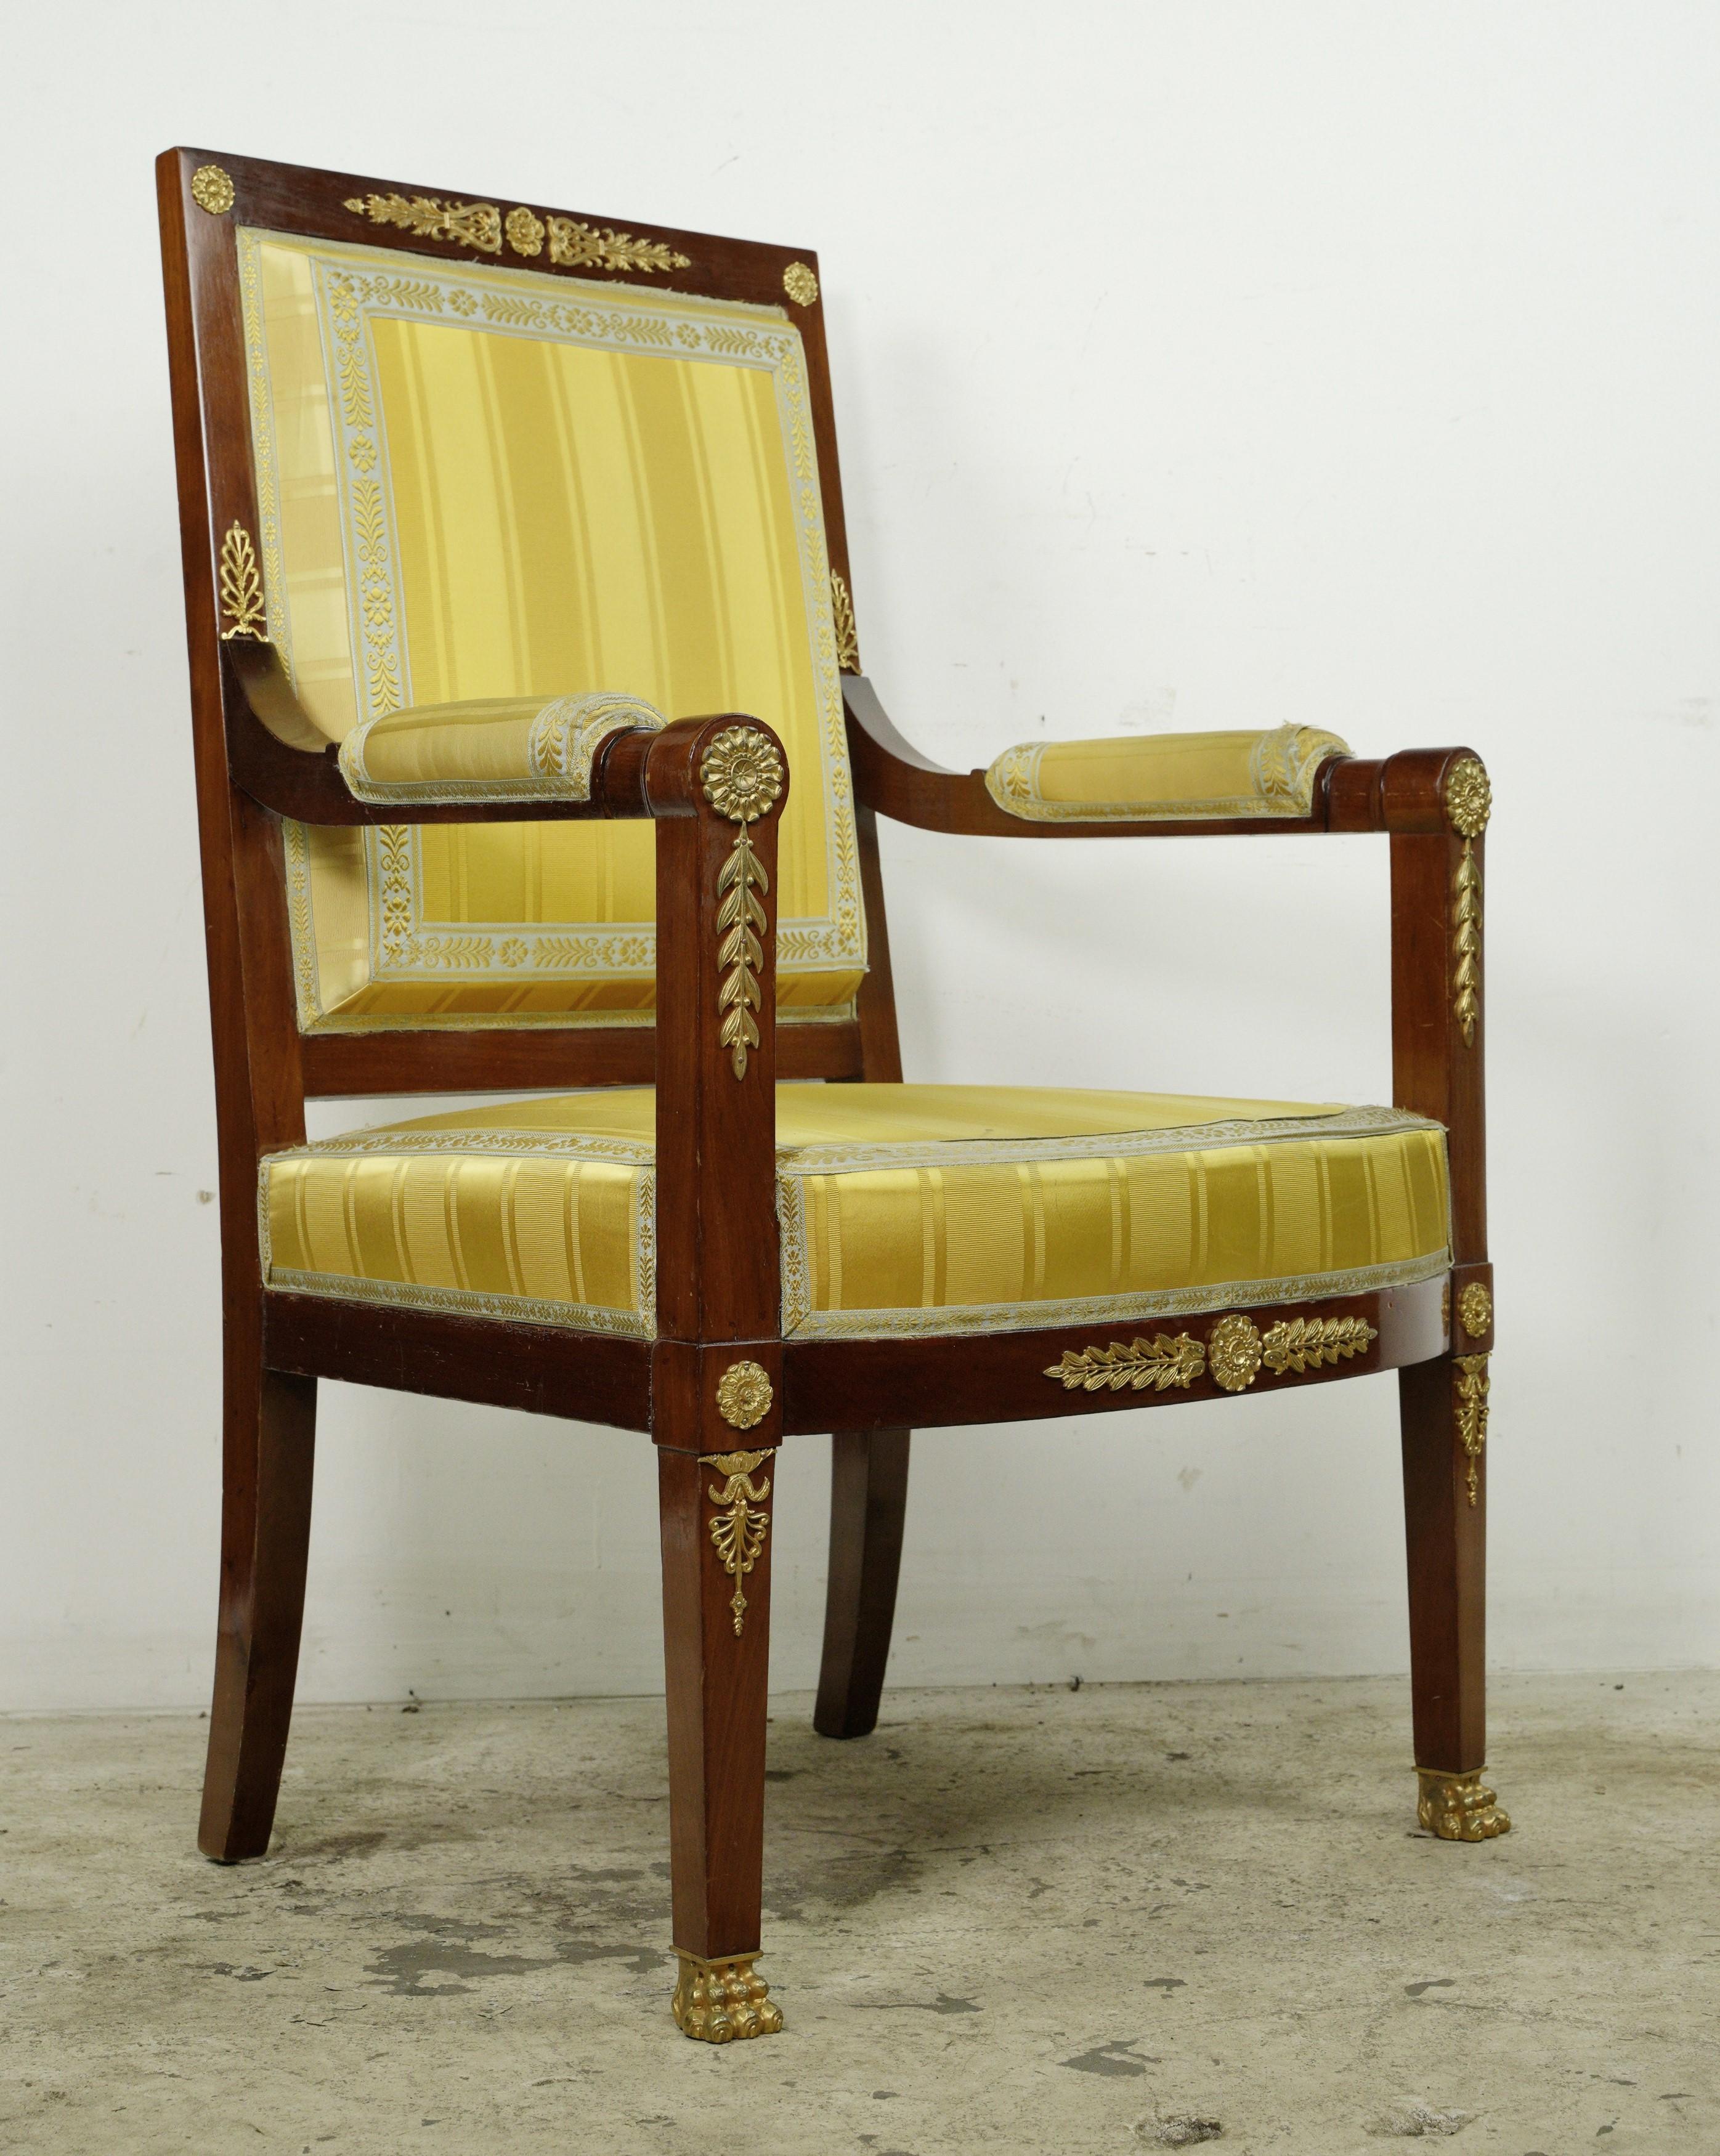 This piece was procured from an esteemed estate located in Greenwich, Connecticut. This armchair features a mahogany frame adorned with gilt brass accents, showcasing intricate scroll and foliate details. The yellow striped upholstery adds a touch